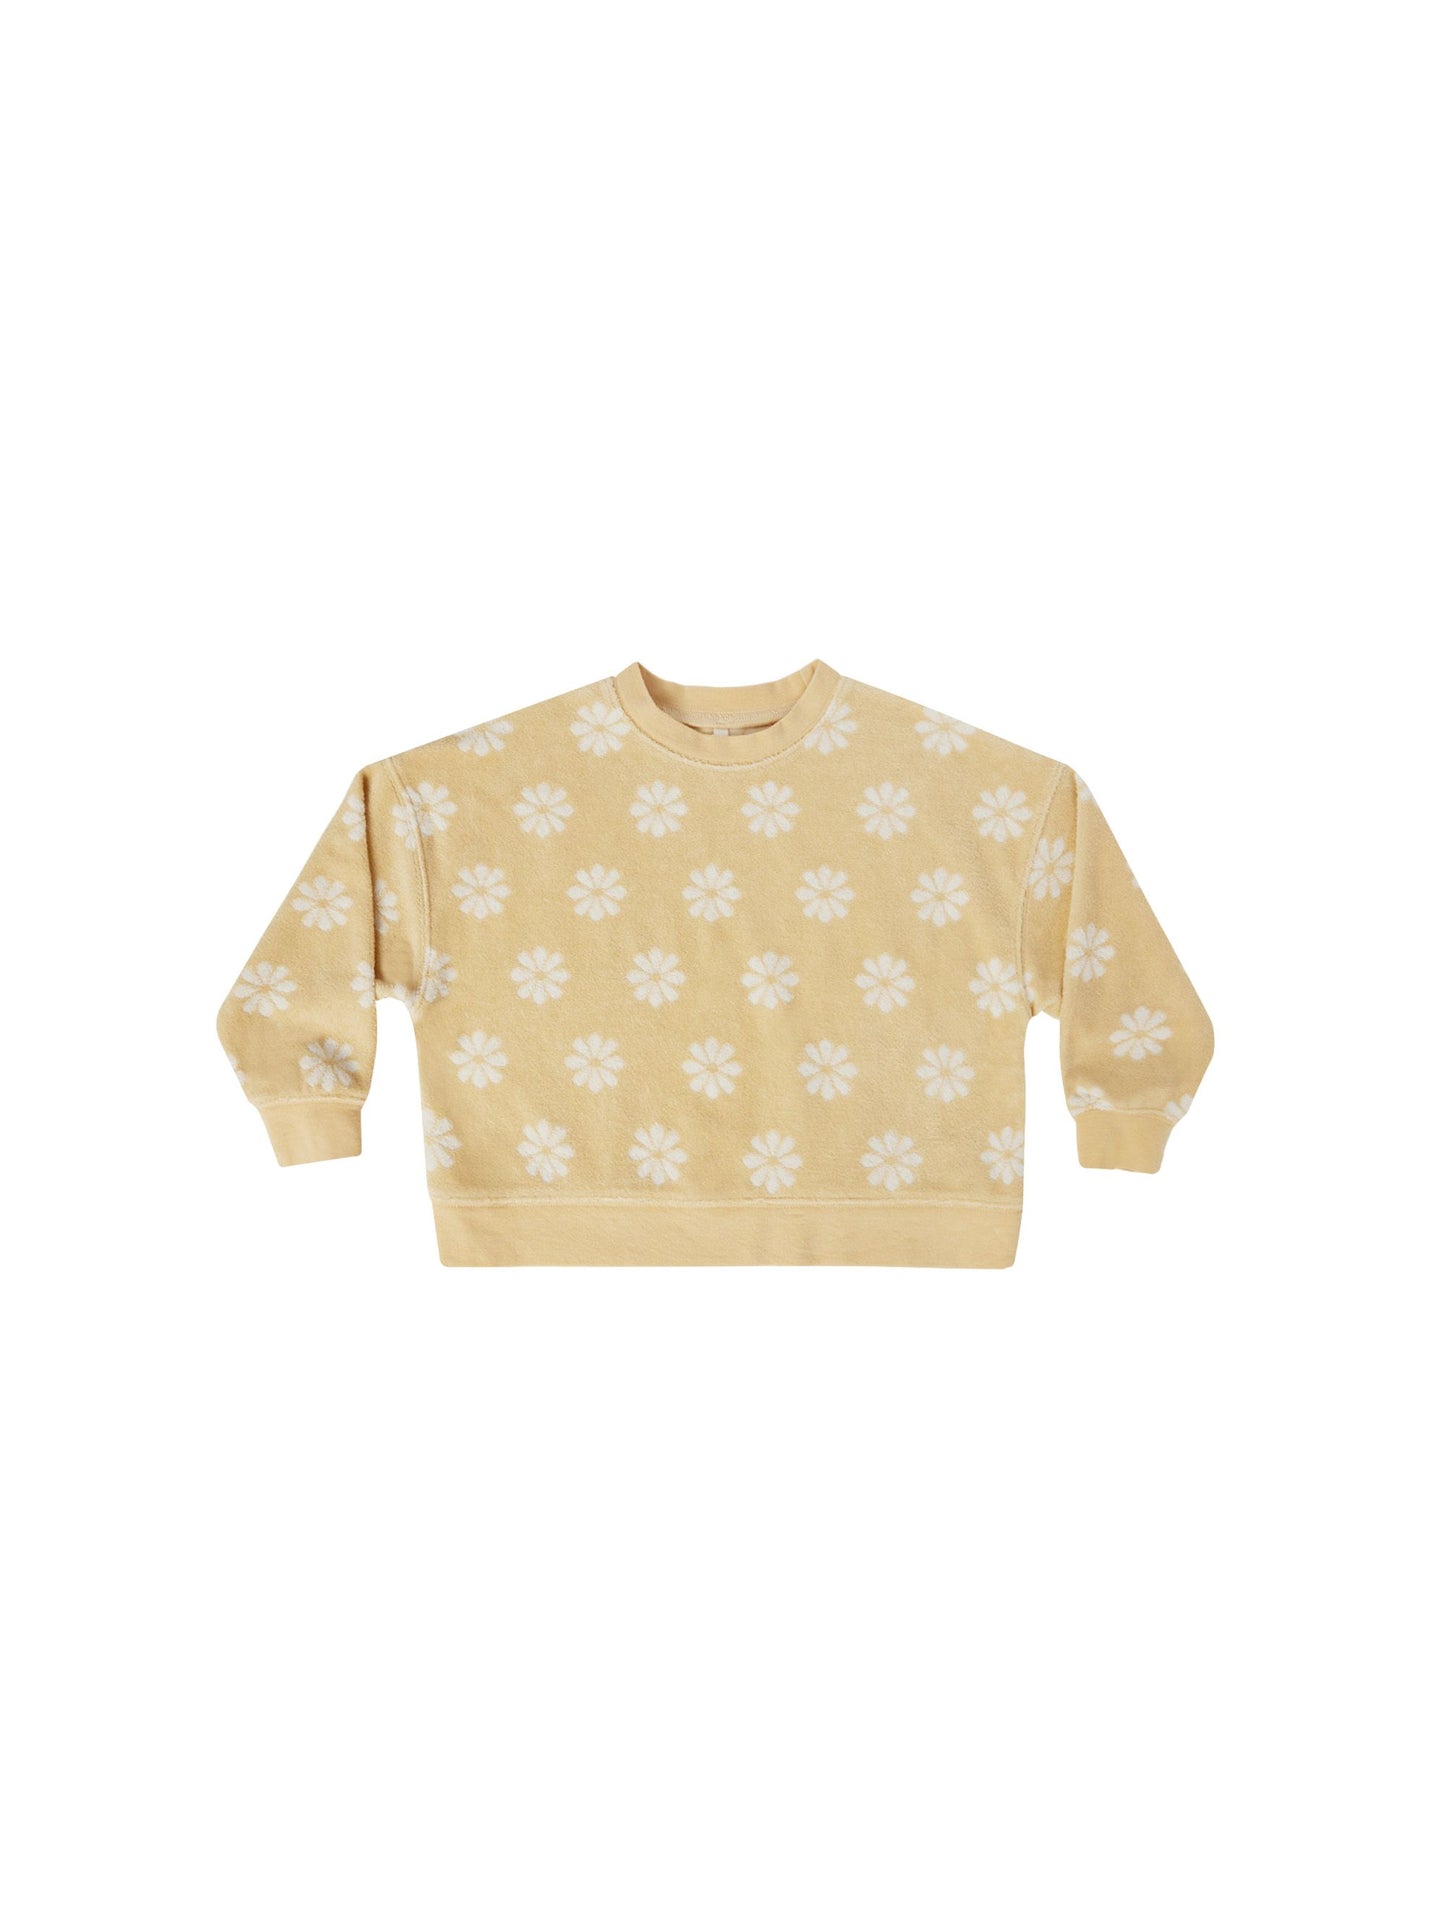 Toddler Boxy Pullover - Yellow Daisy